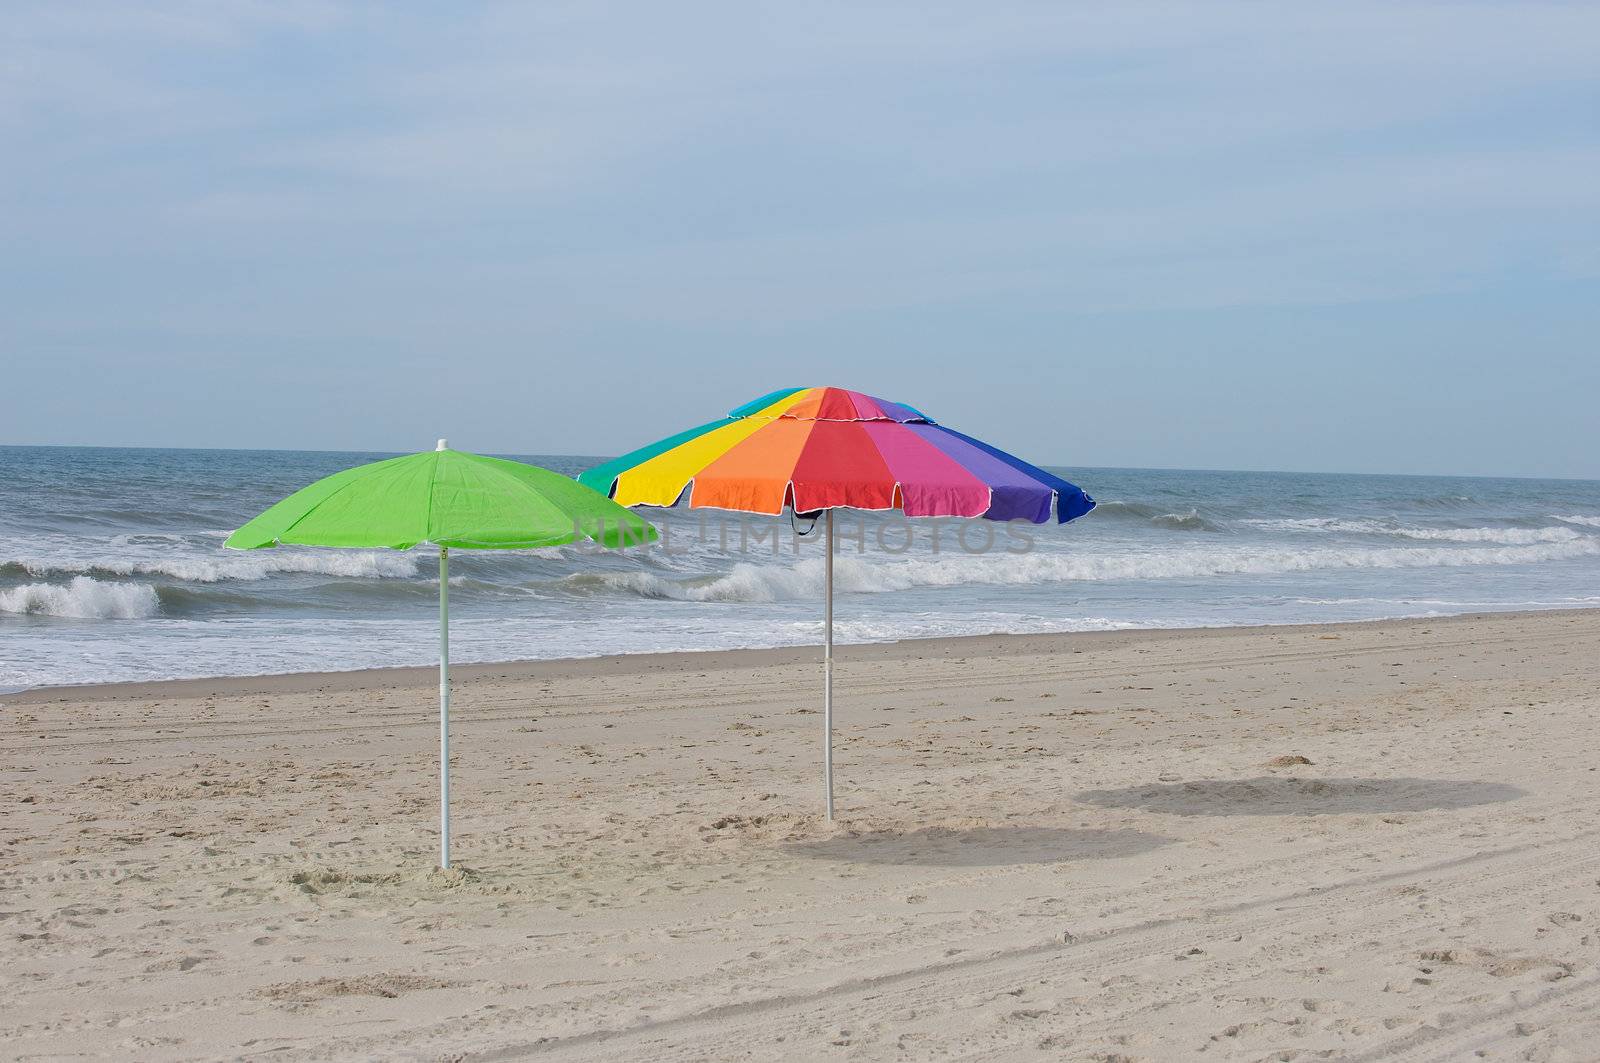 Two deserted umbrellas on the beach overlooking the surf, waiting for a tourist to claim them.